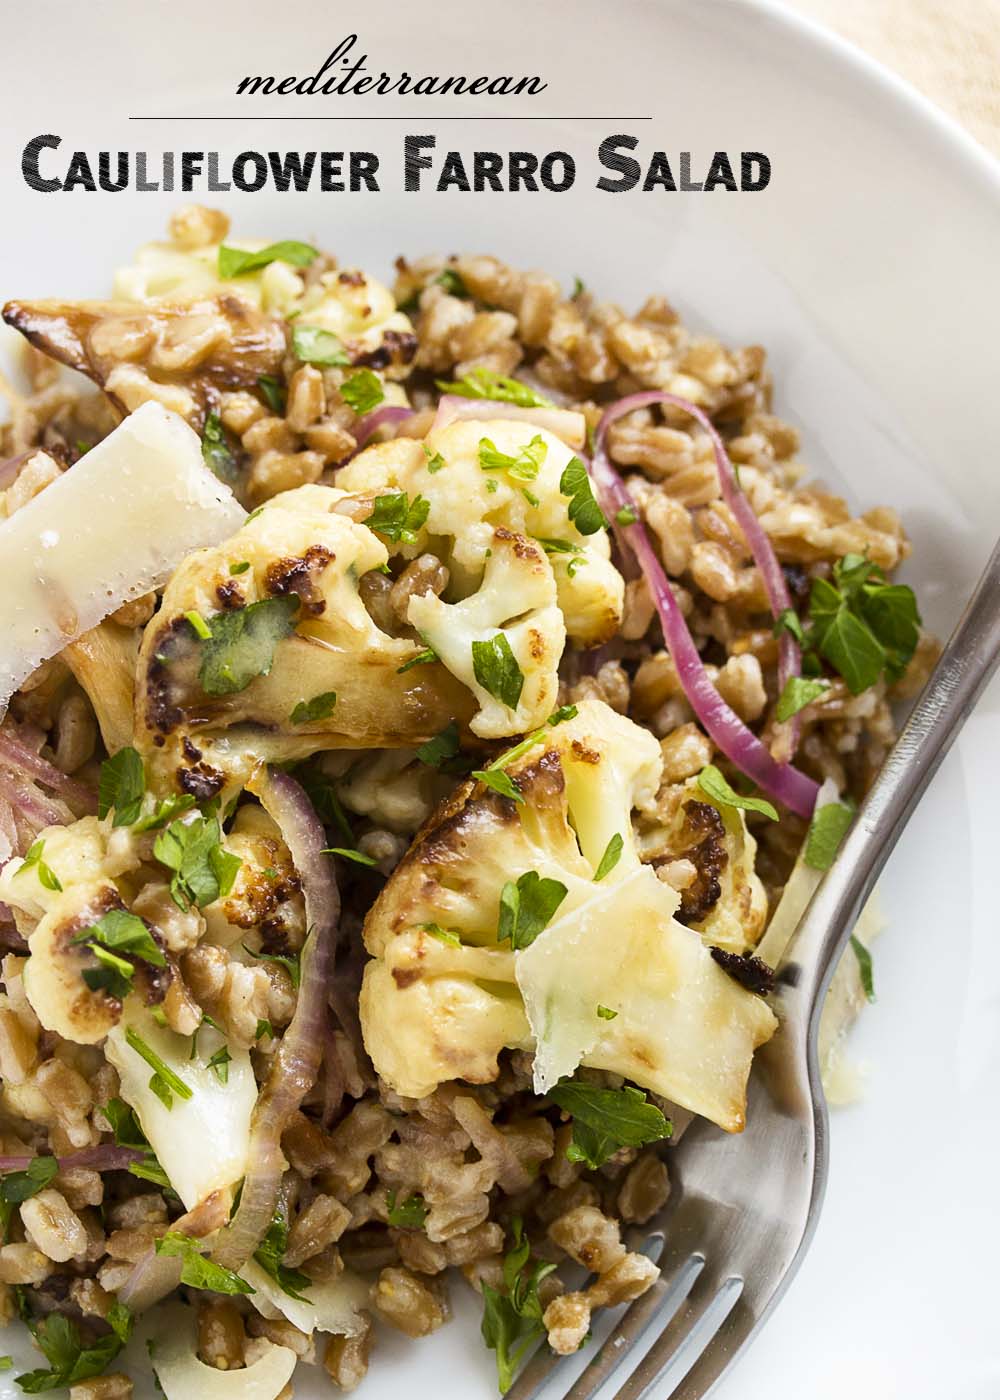 This warm Mediterranean farro salad is tossed with pan roasted cauliflower and creamy tahini lemon dressing to make a great winter salad. | justalittlebitofbacon.com